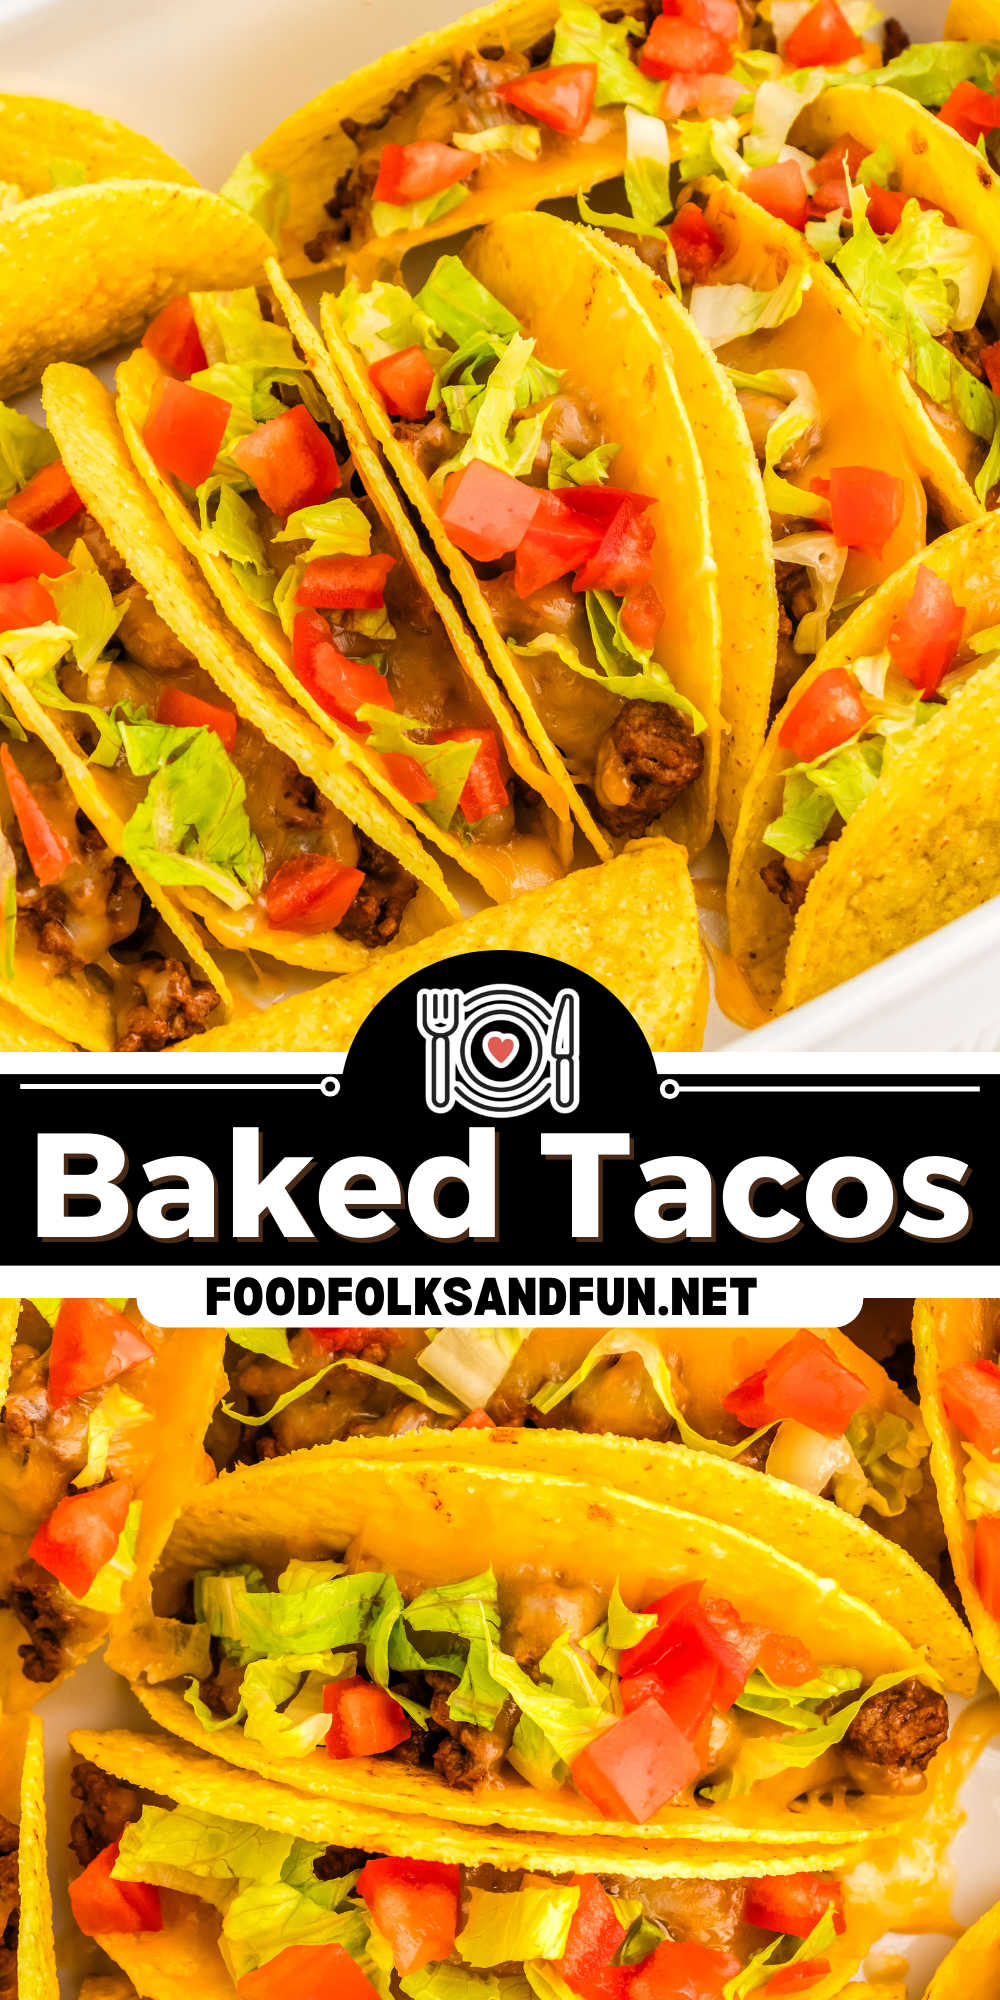 This simple Beef Tacos recipe delivers crispy shells, melty cheese, and endless topping possibilities, all baked to golden perfection in your oven. via @foodfolksandfun